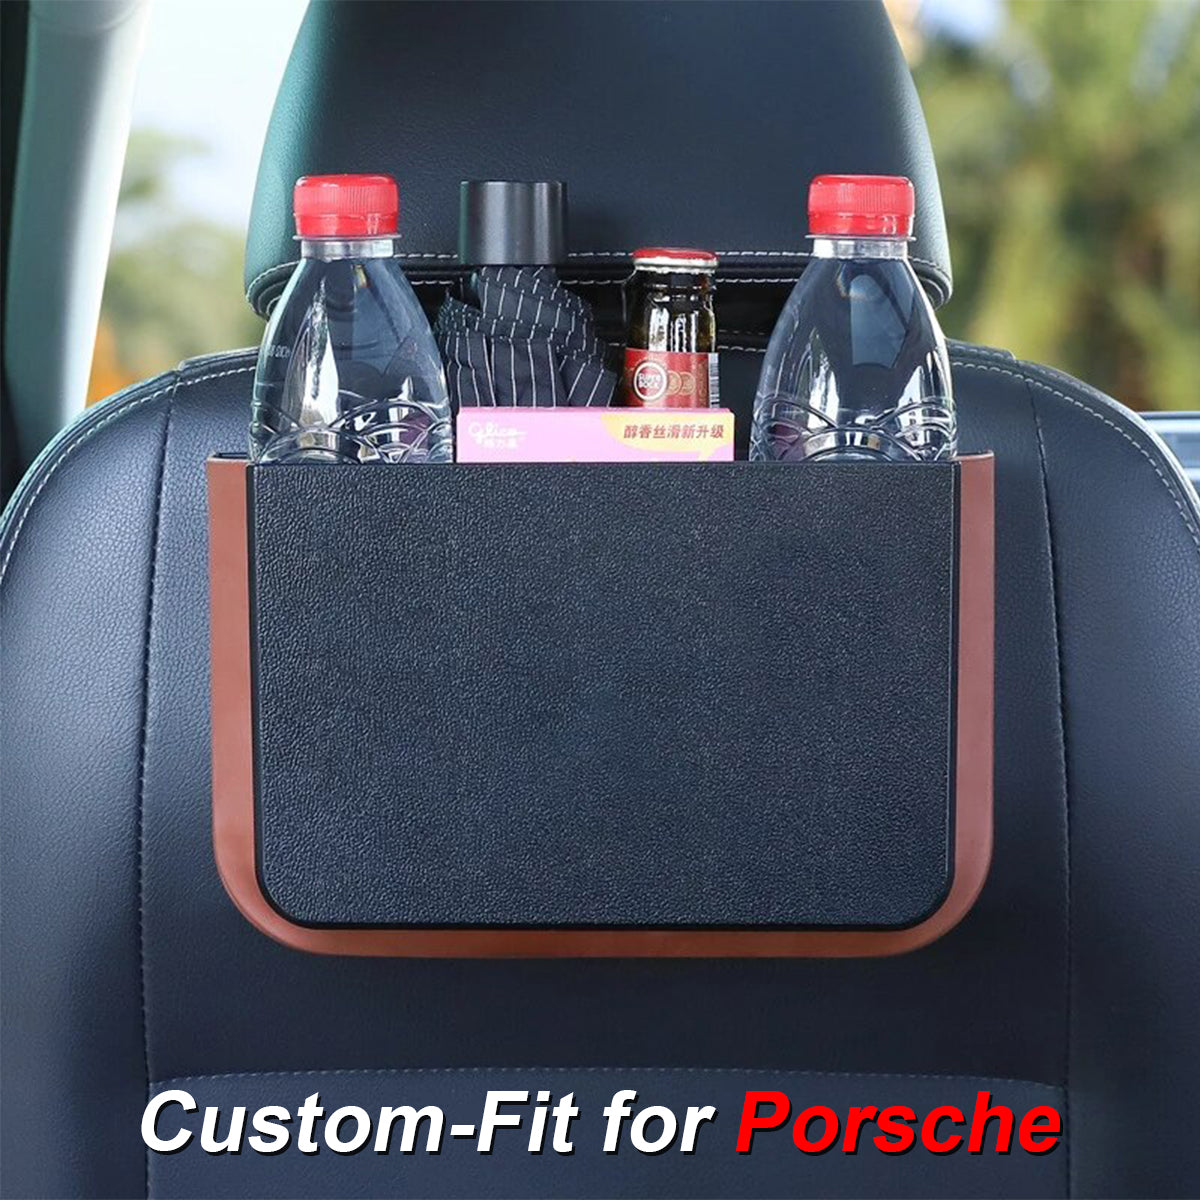 Hanging Waterproof Car Trash can-Foldable, Custom-Fit For Car, Waterproof, Equipped with Cup Holders and Trays DLRL251